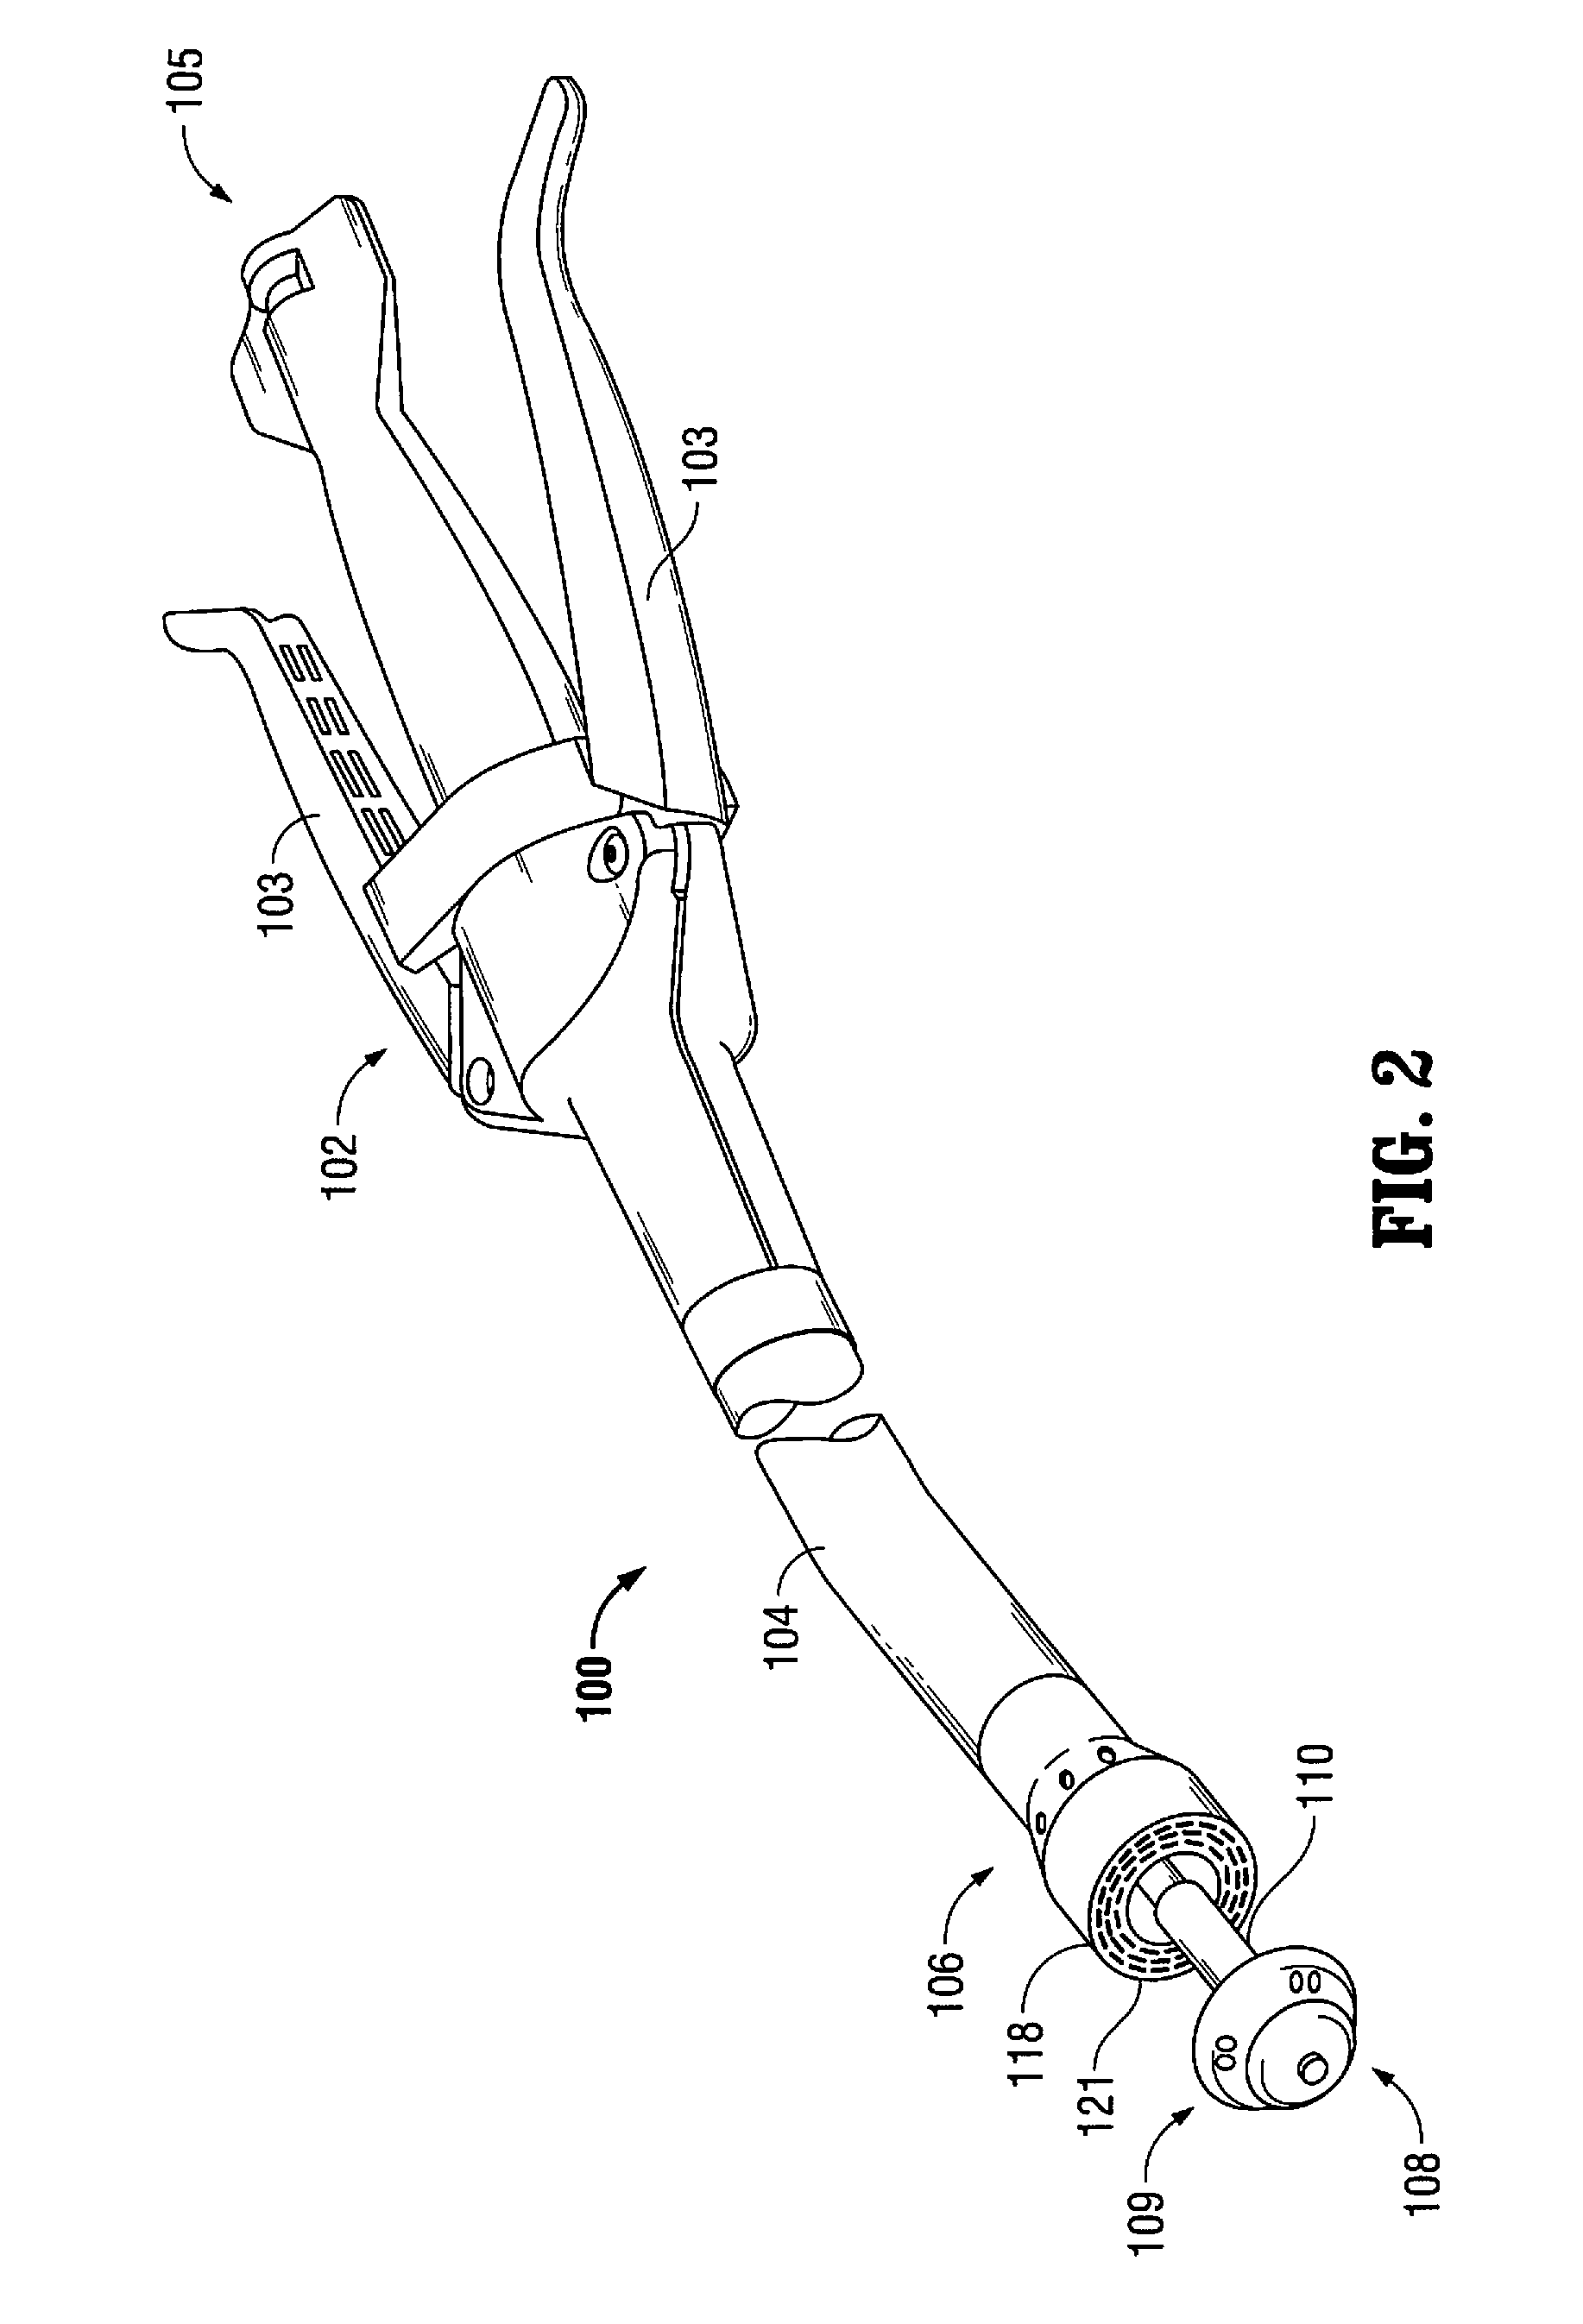 Surgical instruments for use with diagnostic scanning devices